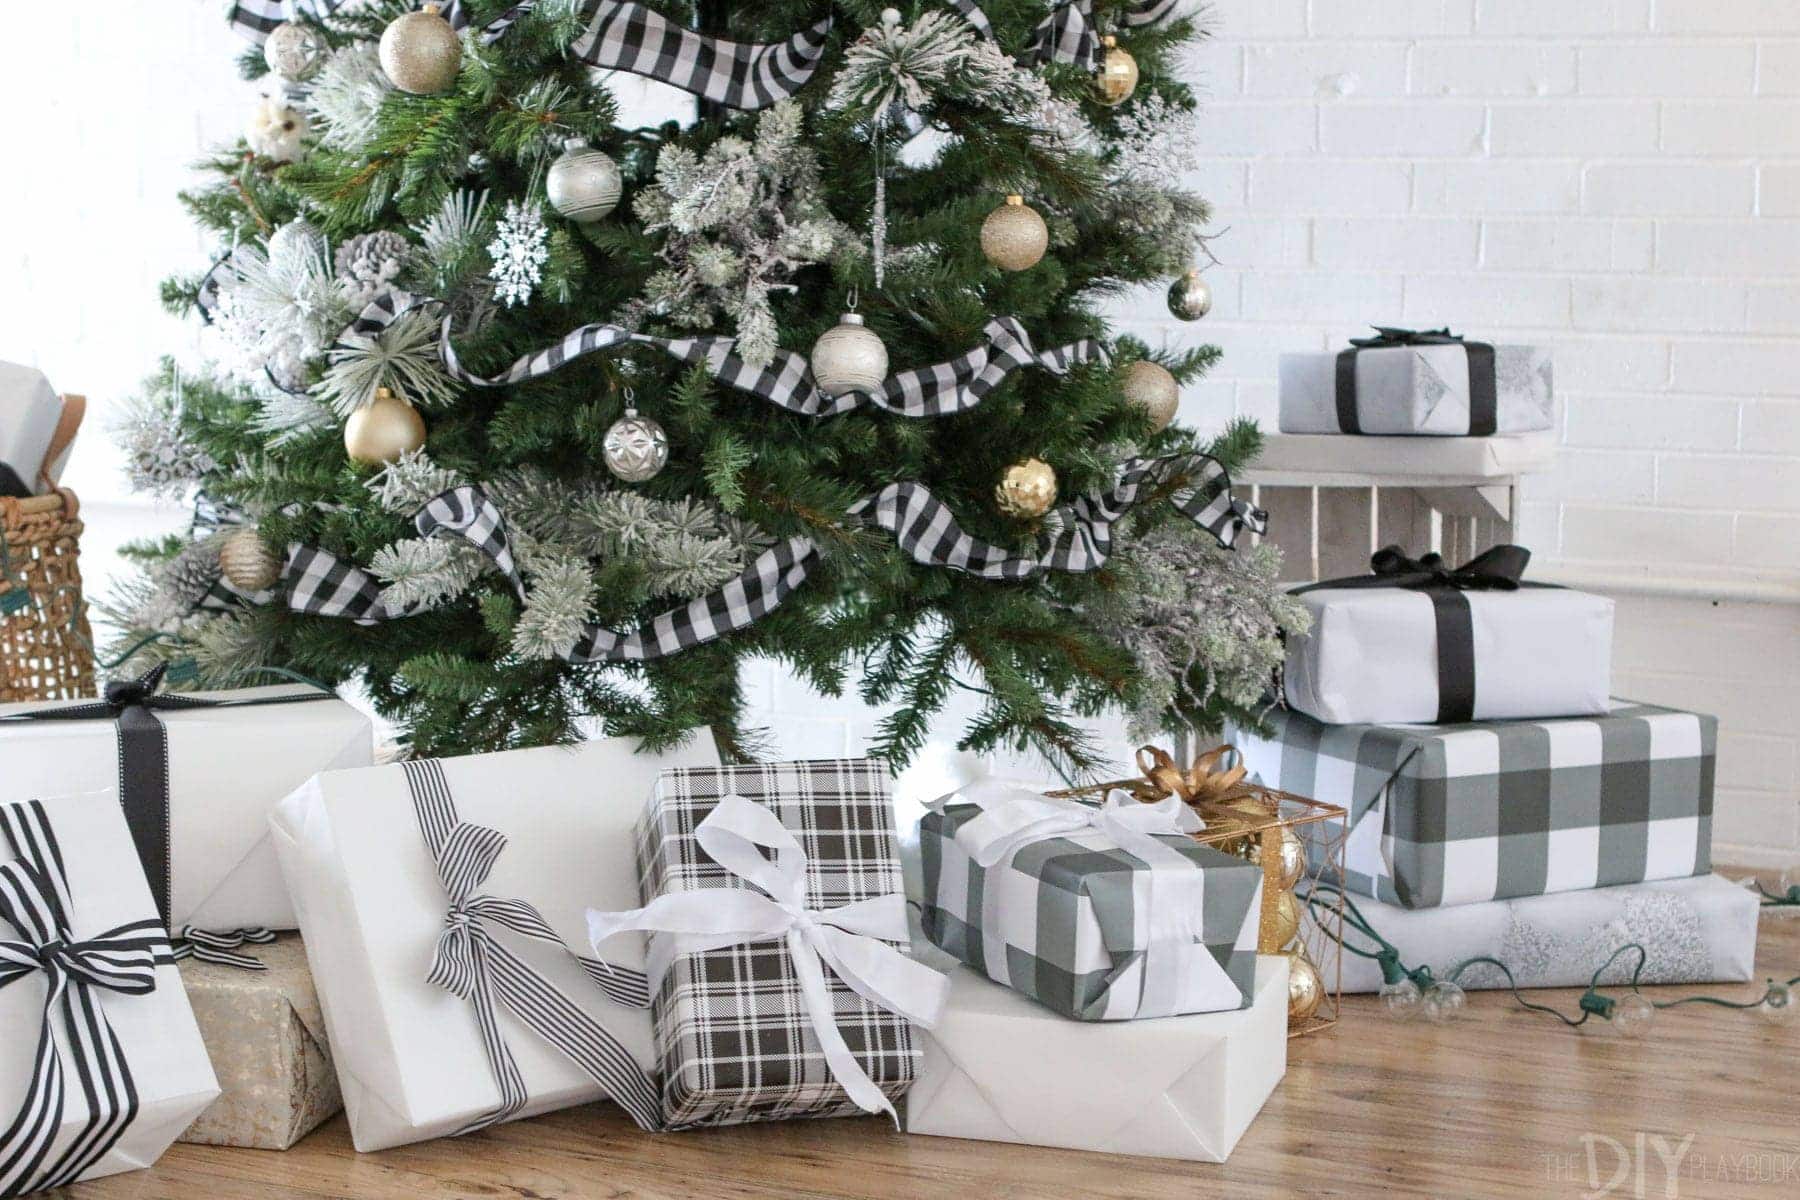 Our Black and White Christmas Tree for Michaels - along with matching wrapped presents! | DIY Playbook